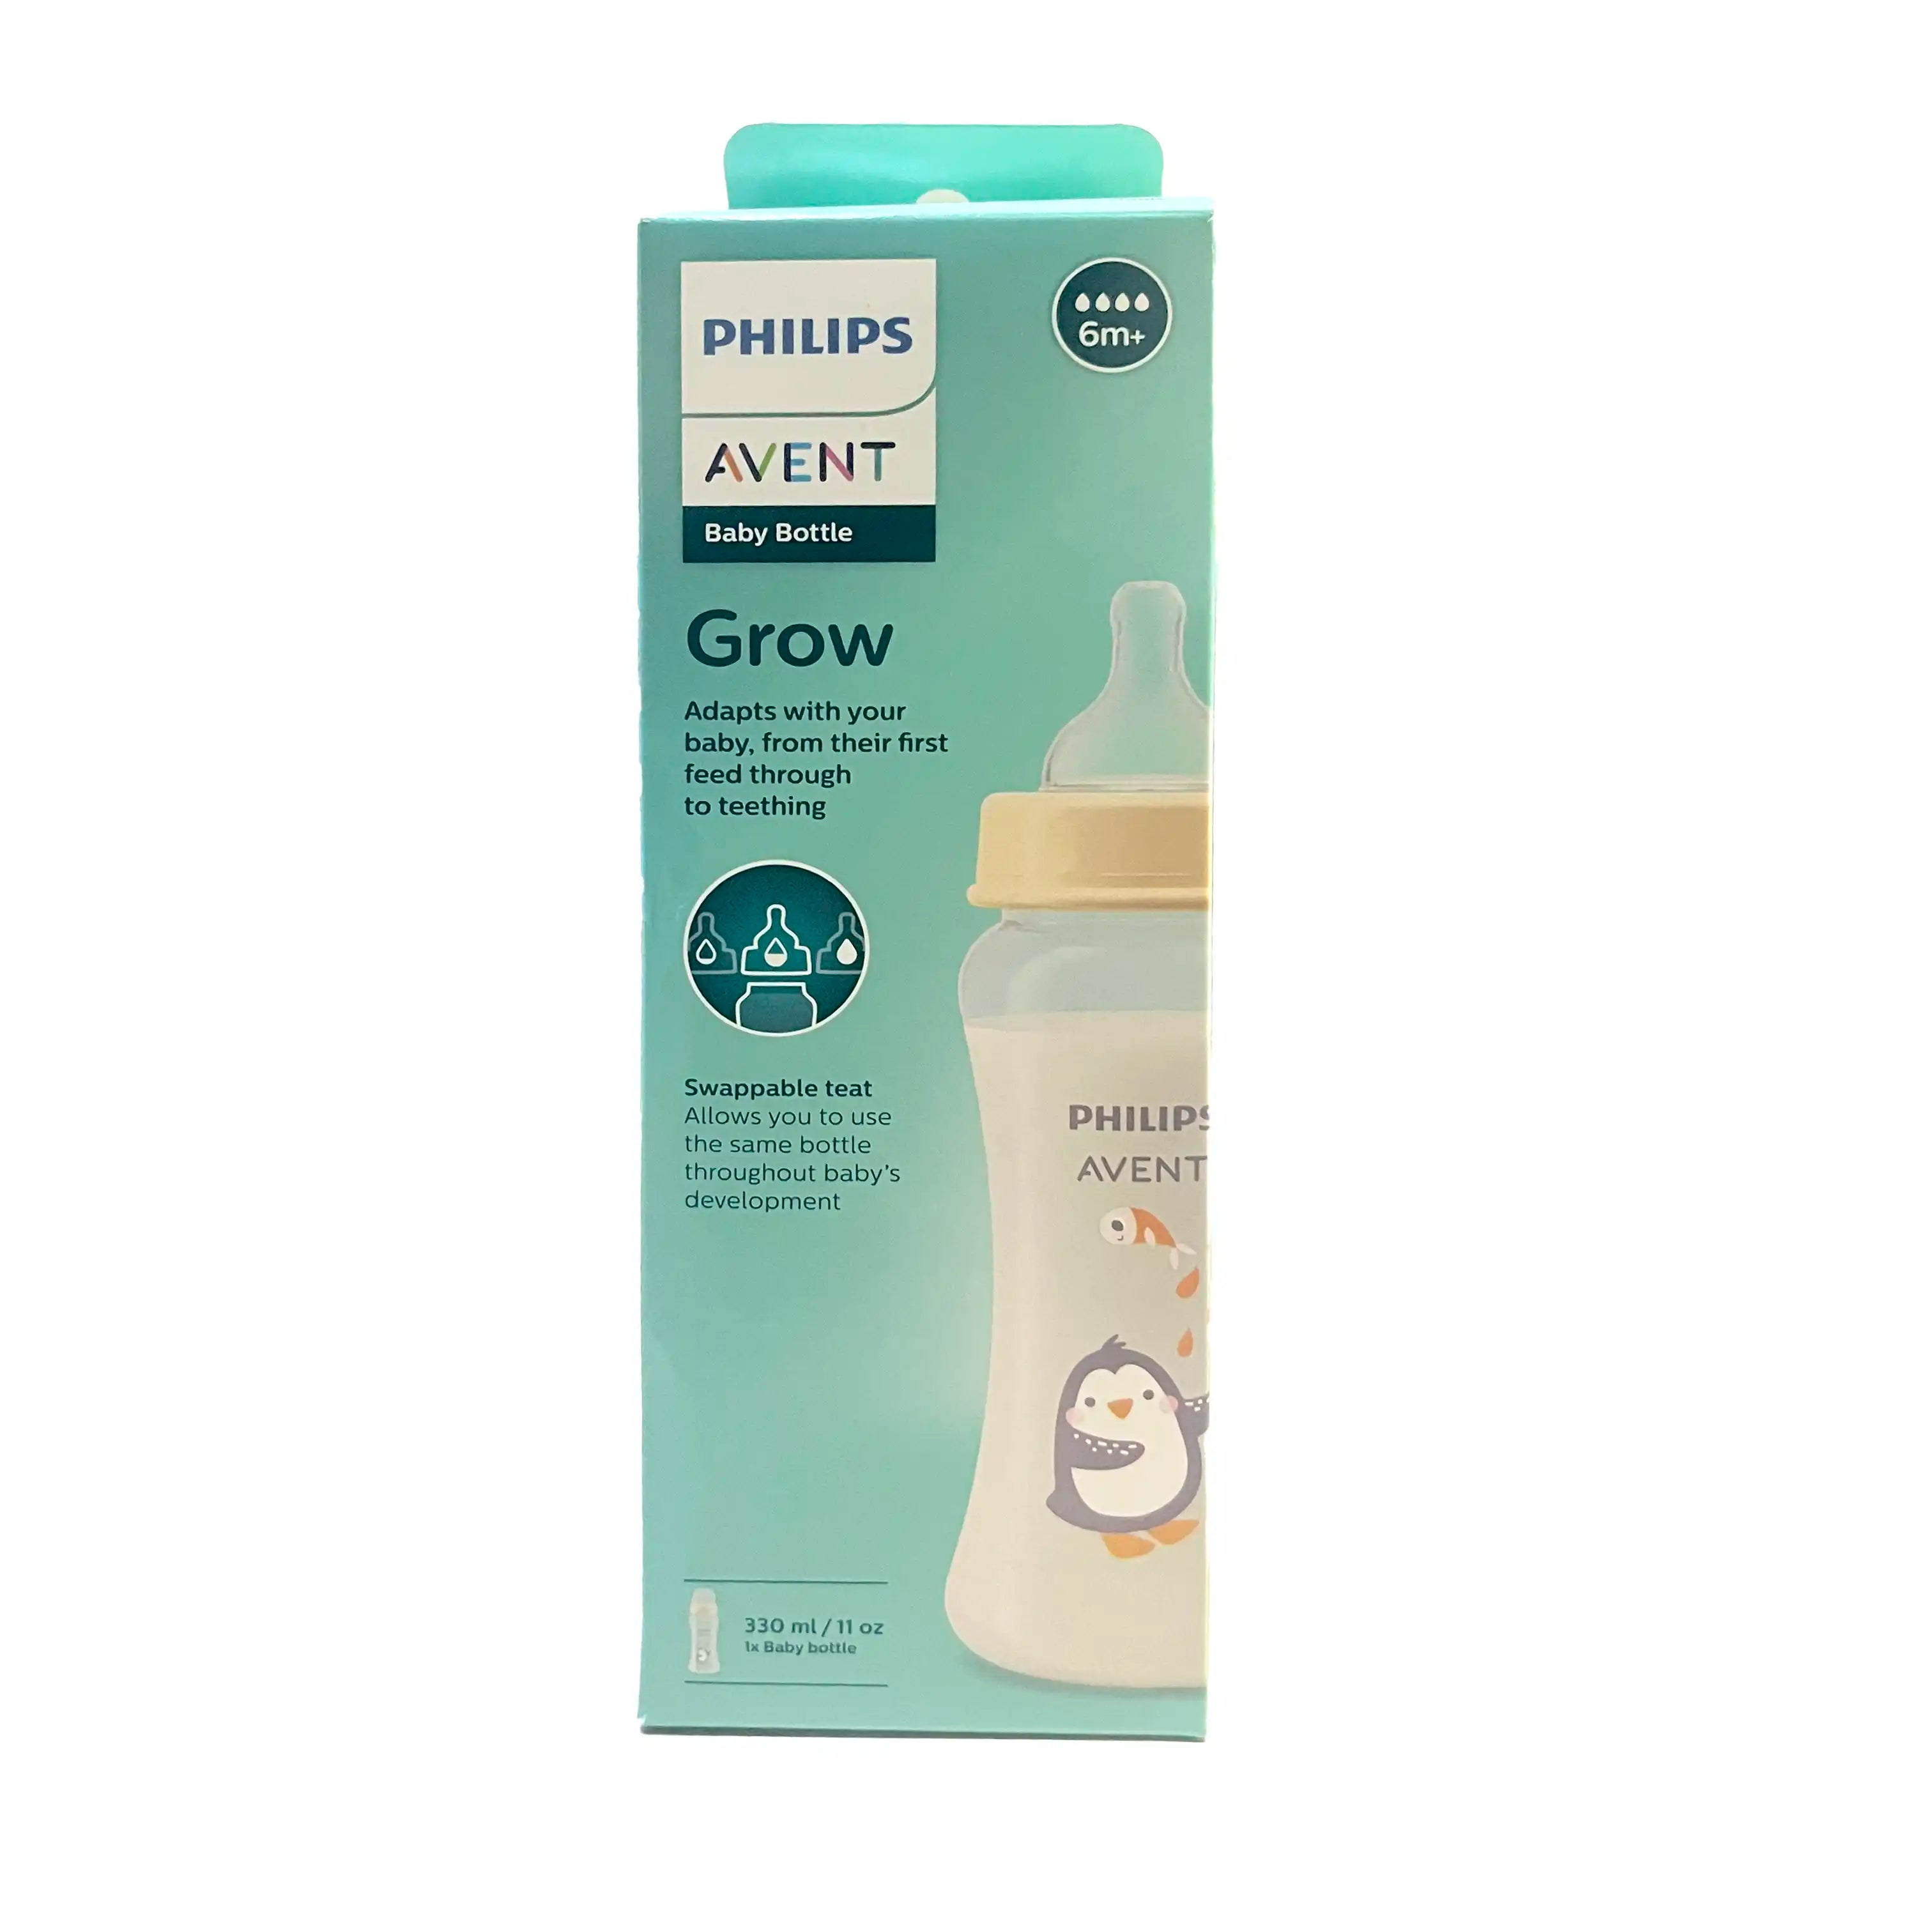 Buy Philips Avent Grow Baby Feeding Bottle - 330ml, 6+months Online in India at uyyaala.com